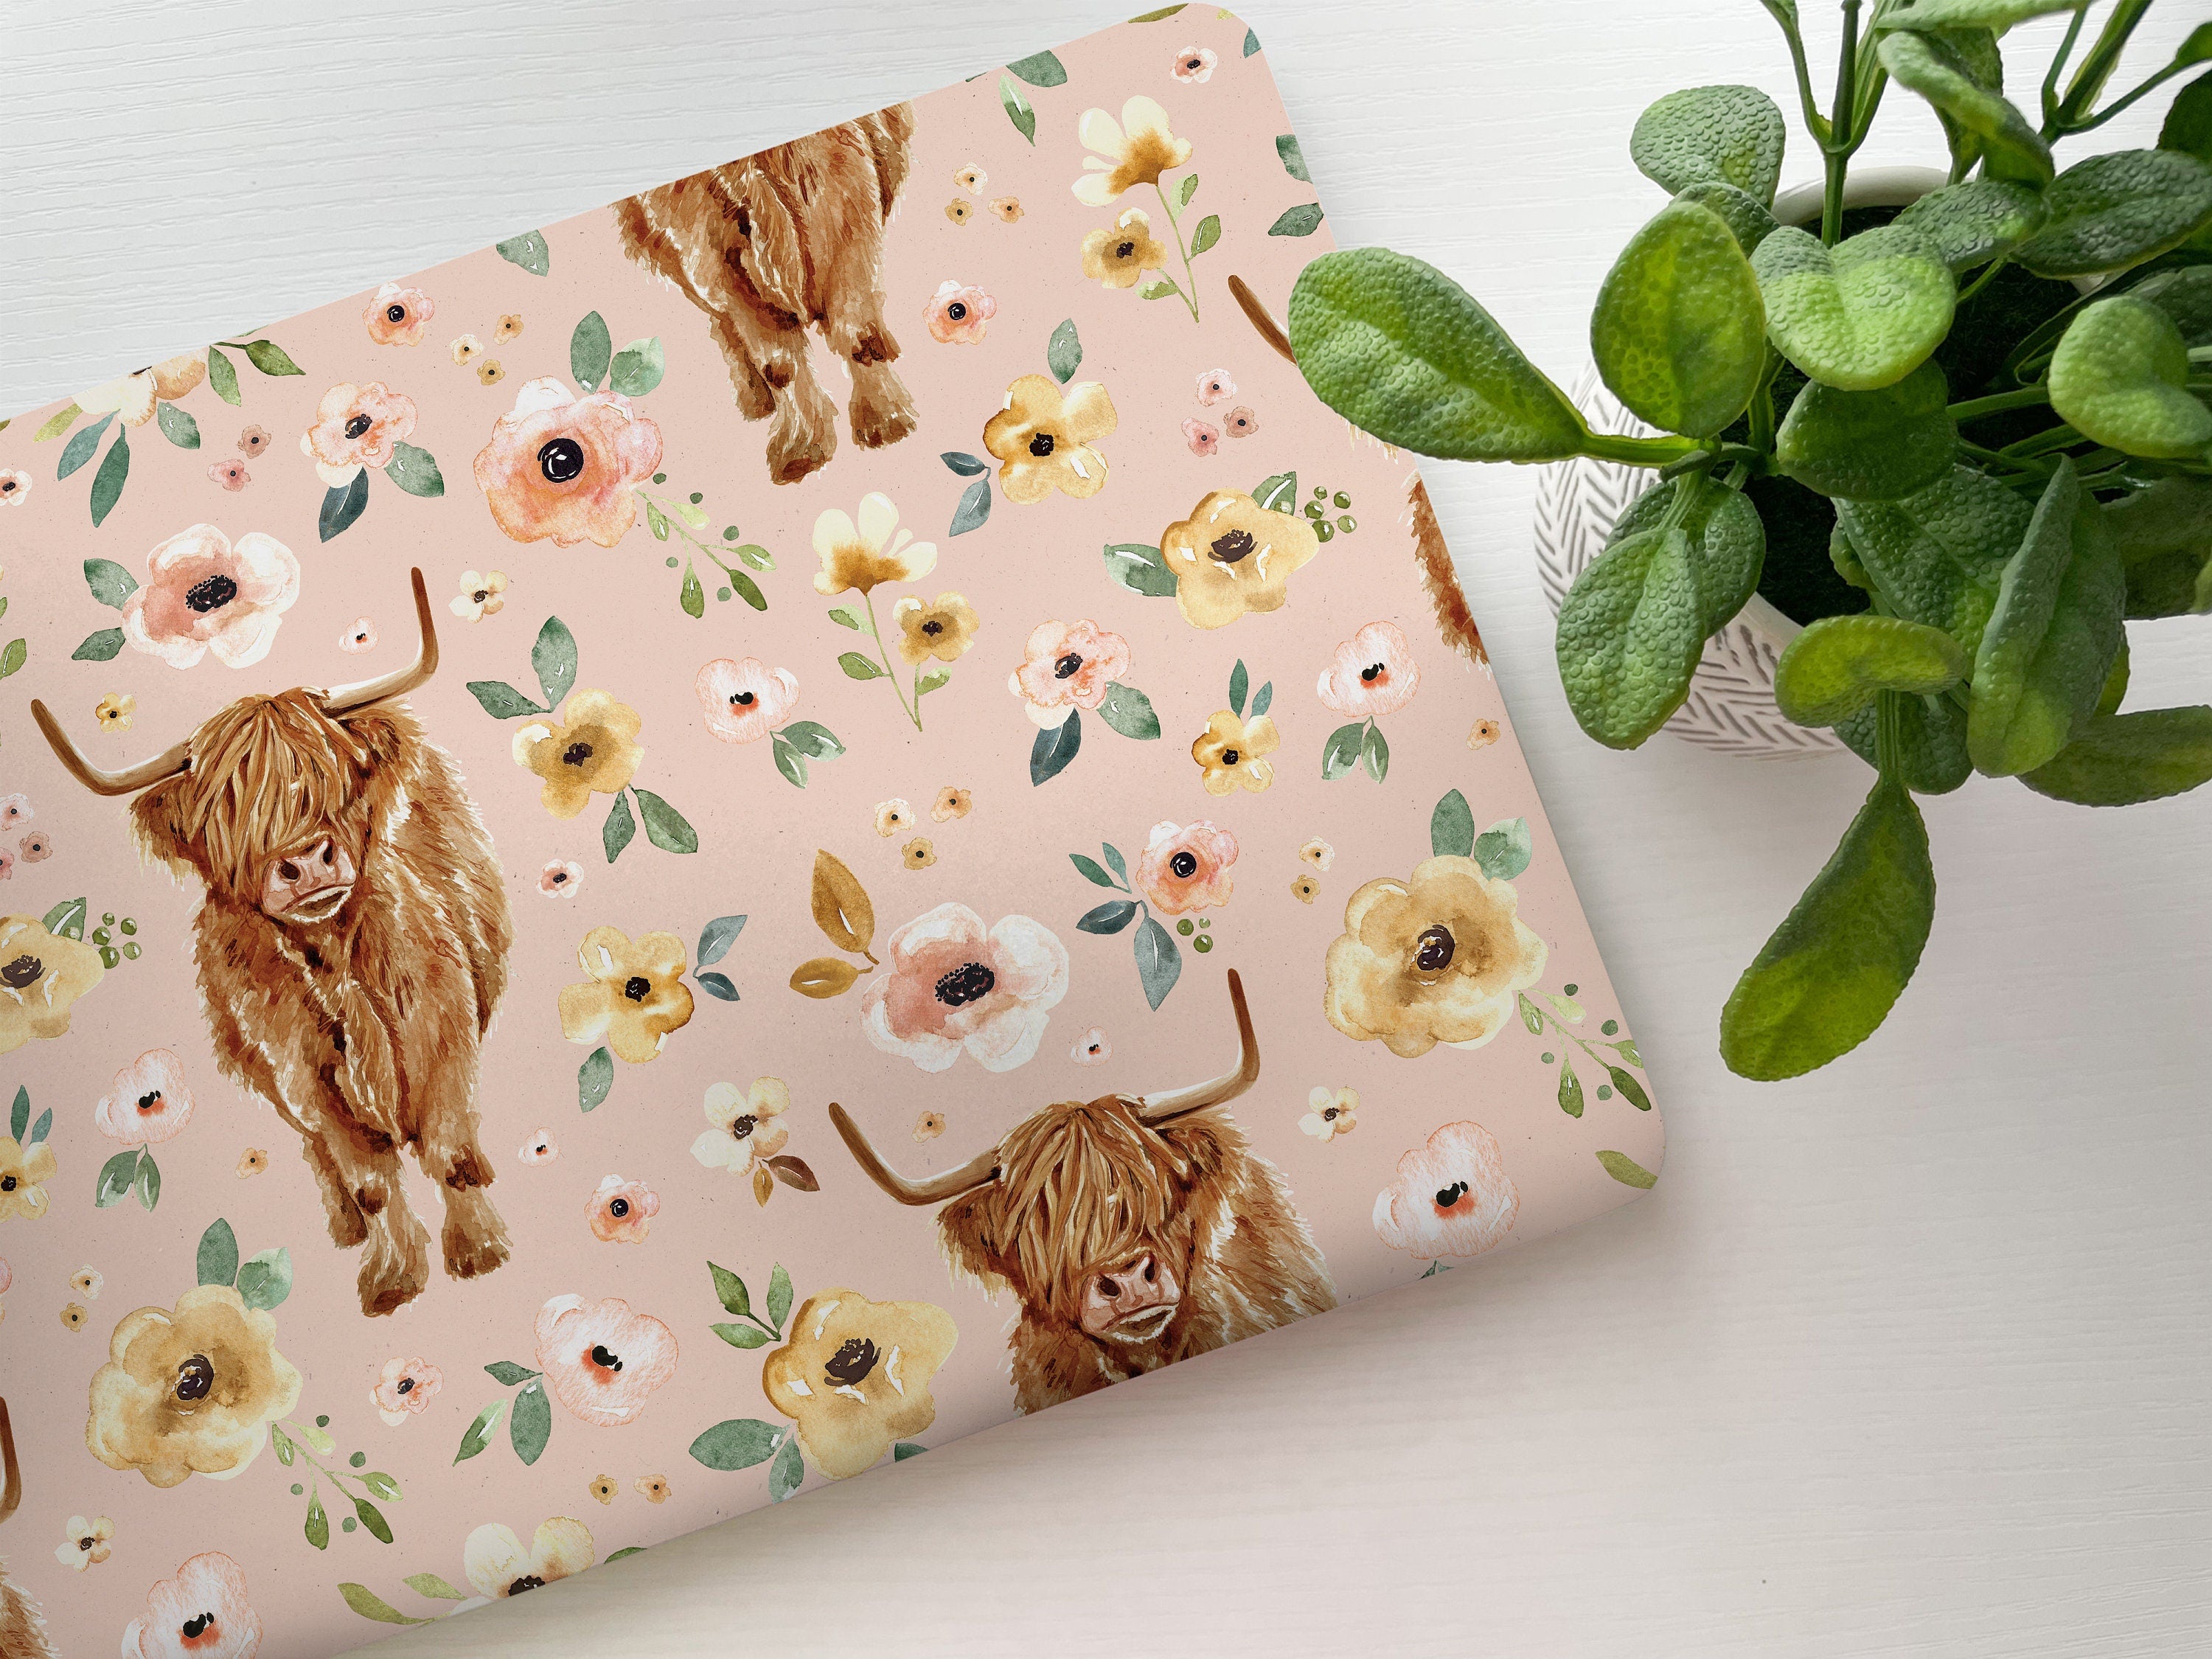 Highland Cow Laptop Skin, Laptop Cover, Laptop Skins, Removable